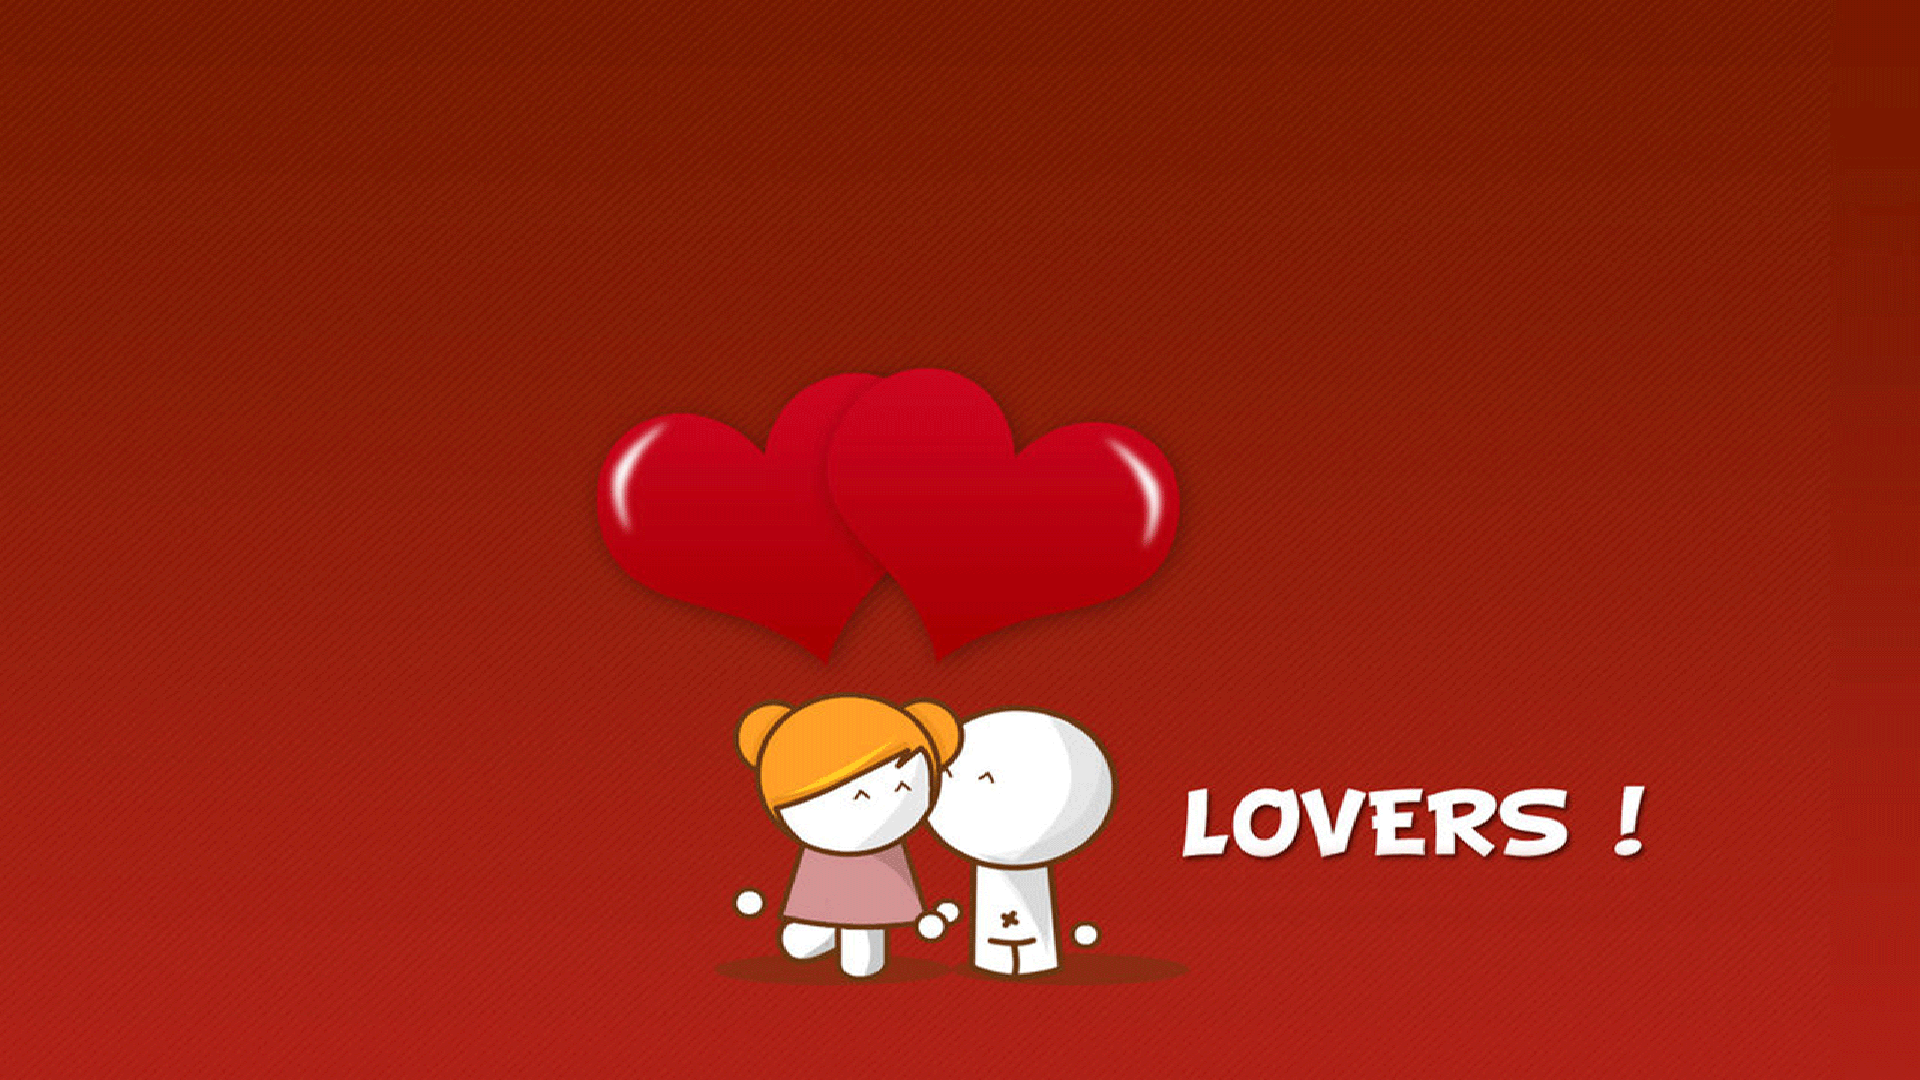 I Love You HD Wallpapers Free Download 